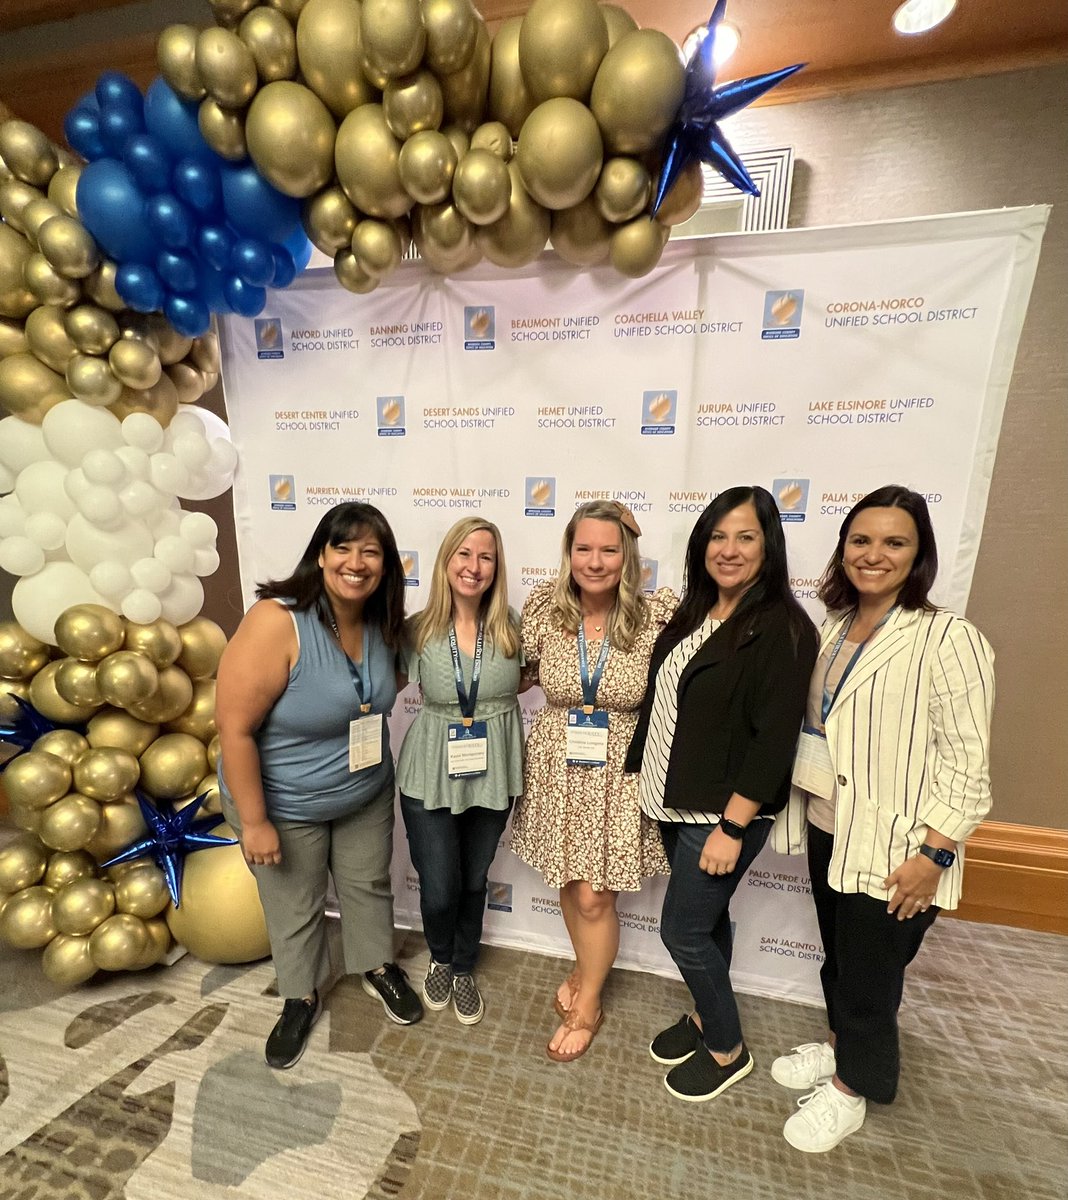 So fortunate to connect and build capacity with these amazing colleagues! #ExcellenceThroughEquity @lmanrique02 @APJahangirVVUSD @MrsValcarcel